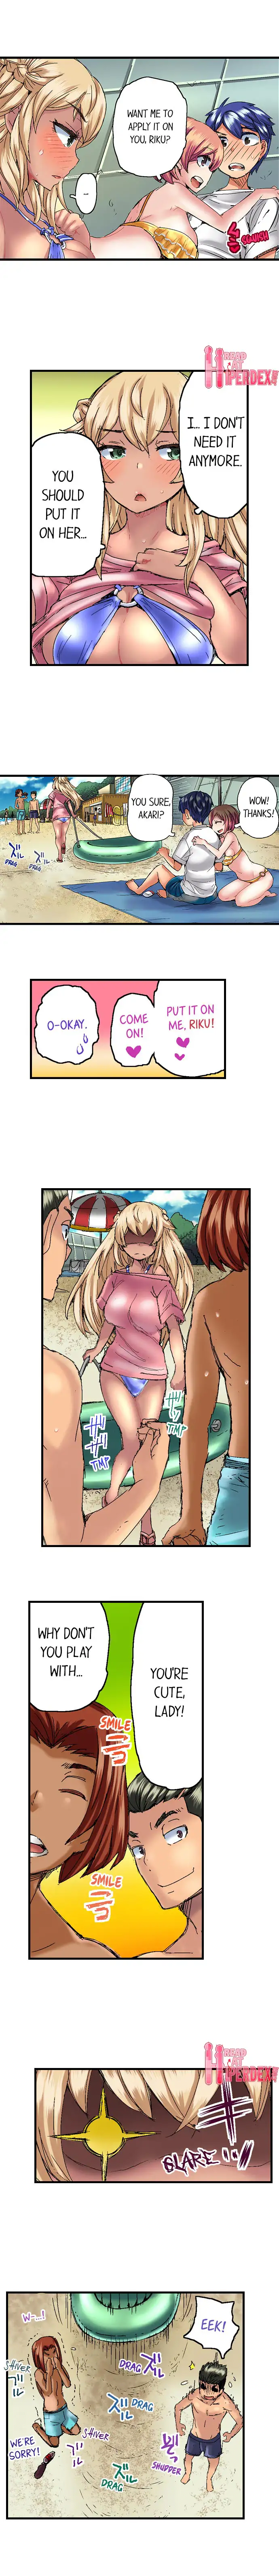 Taking a Hot Tanned Chick’s Virginity - Chapter 8 Page 7